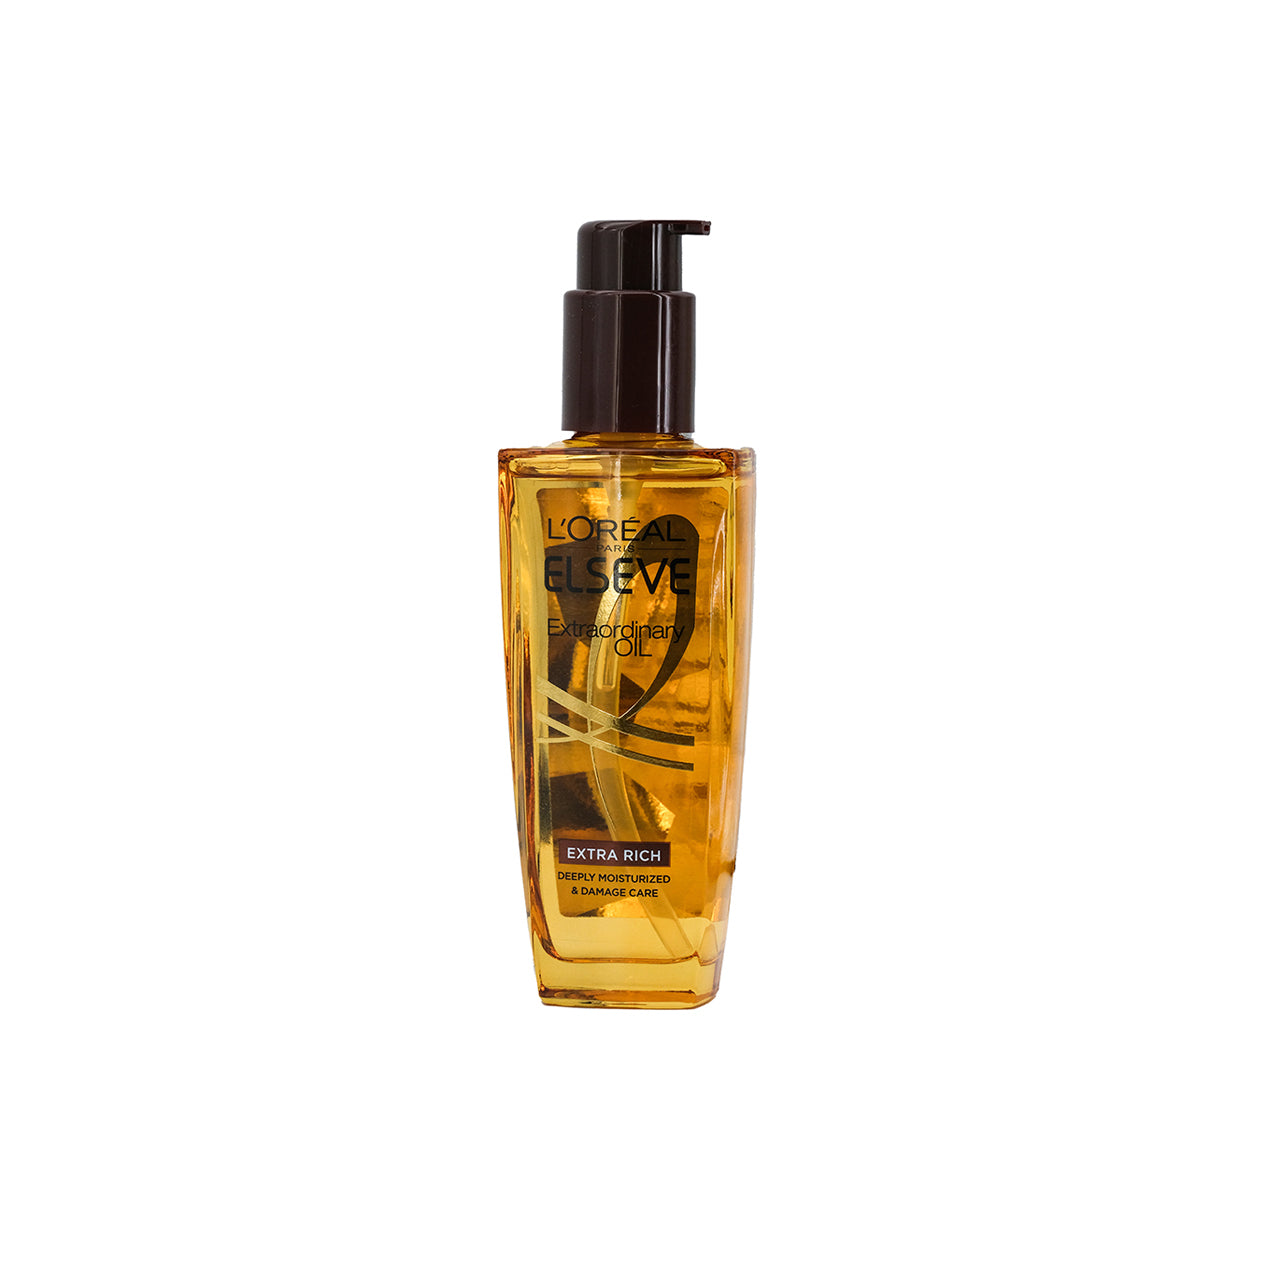 L'Oreal Paris Extraordinary Oil Extra Rich Deeply Moisturized & Damage Care Brown – For Dry Hair 100ml | Sasa Global eShop